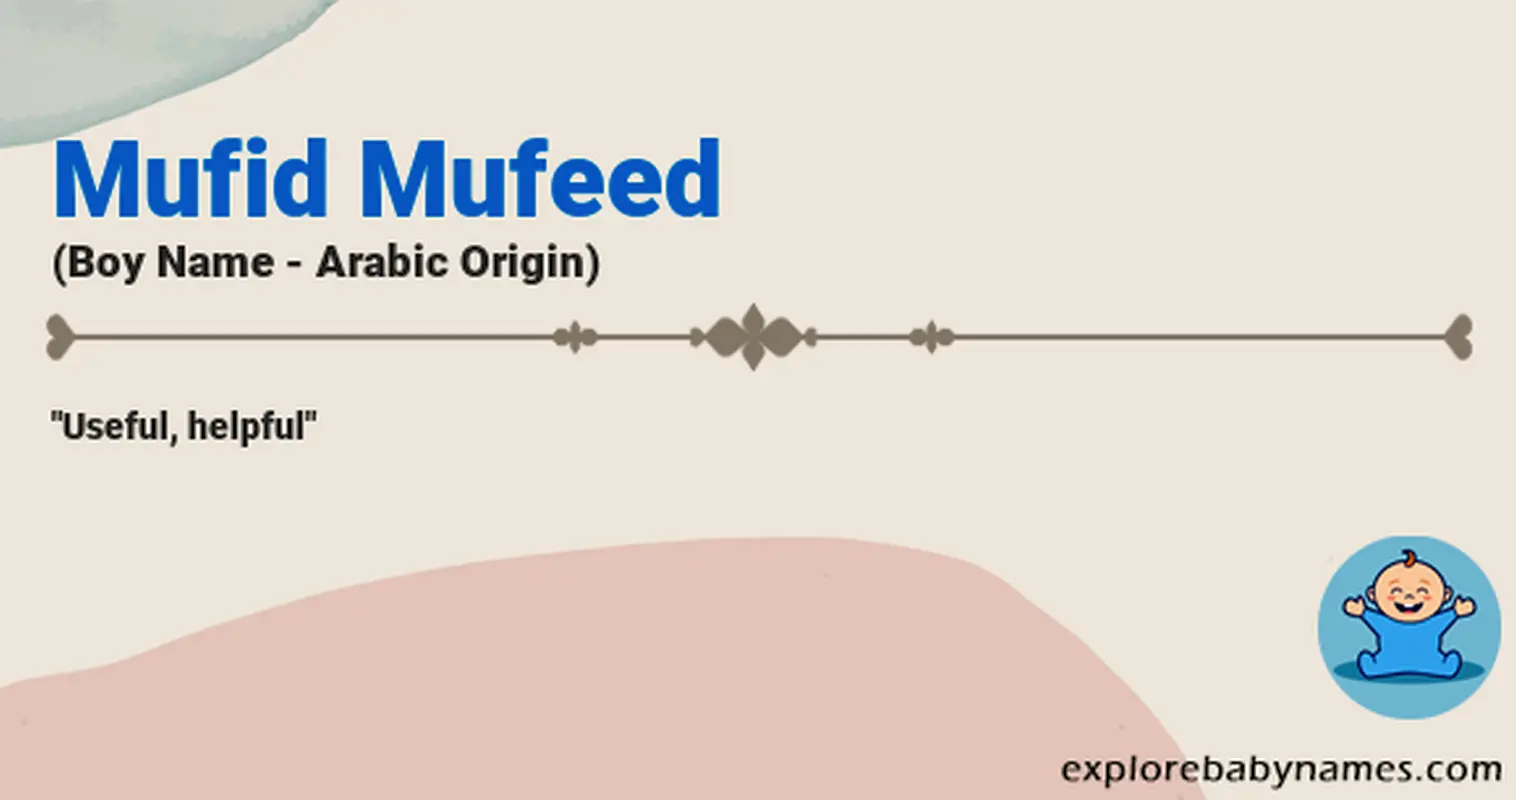 Meaning of Mufid Mufeed